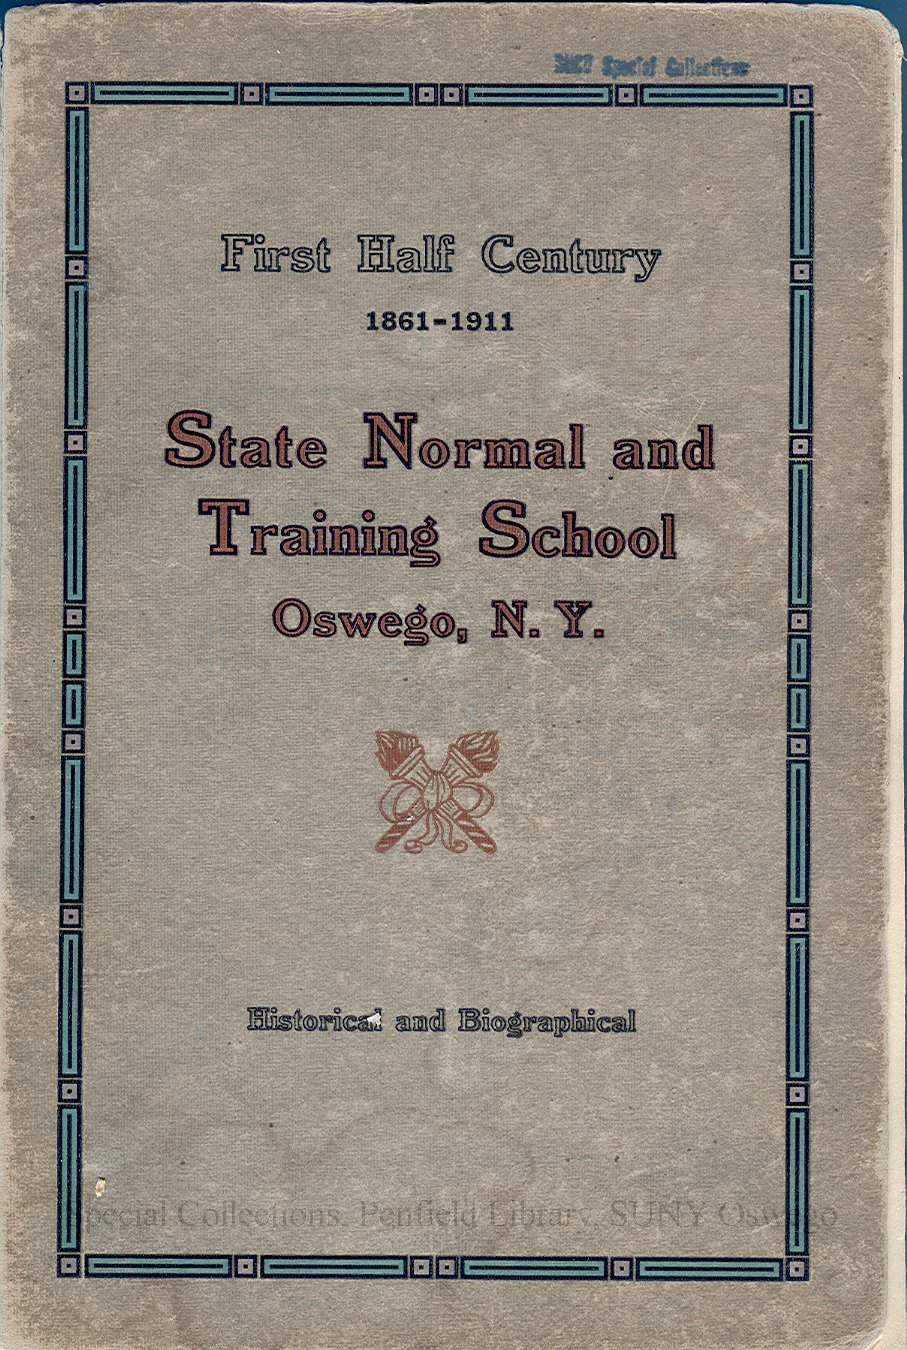 History of the First Half Century of the Oswego State Normal and Training School, 
Oswego, N.Y. - Page 1